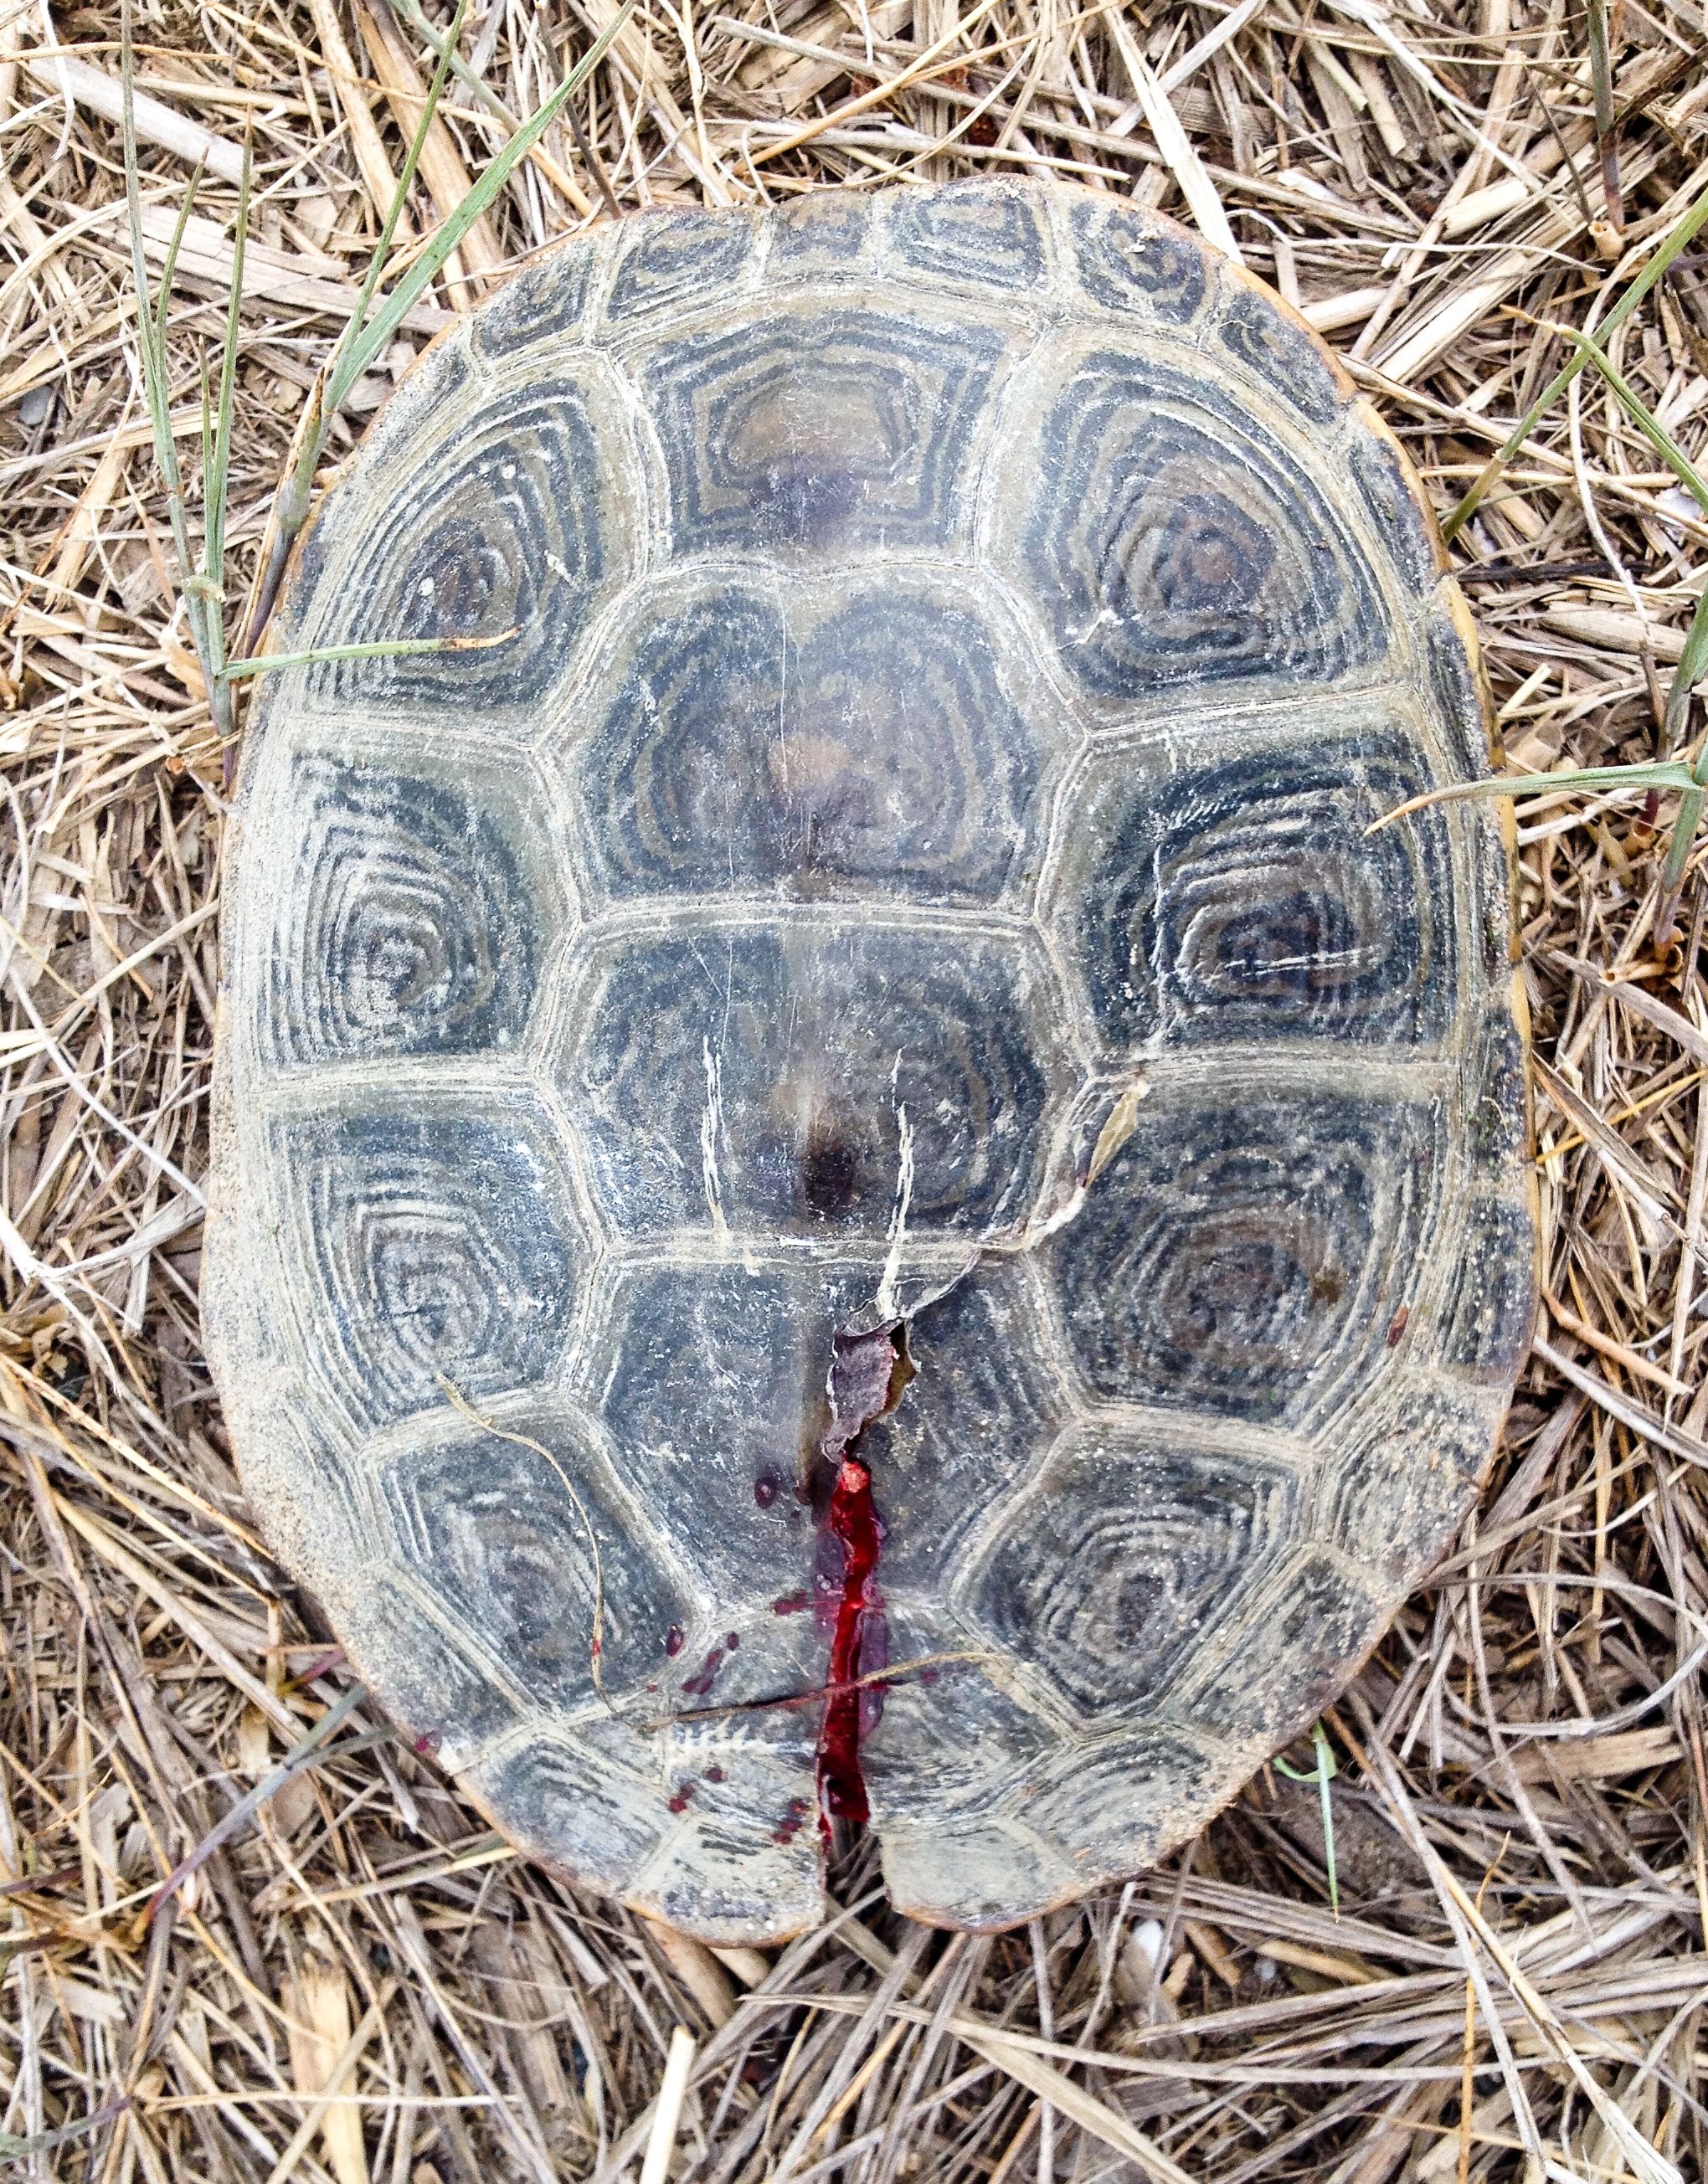 Terrapin after being run over. Despite the blood, Karen knew this turtle had a good chance of surviving.